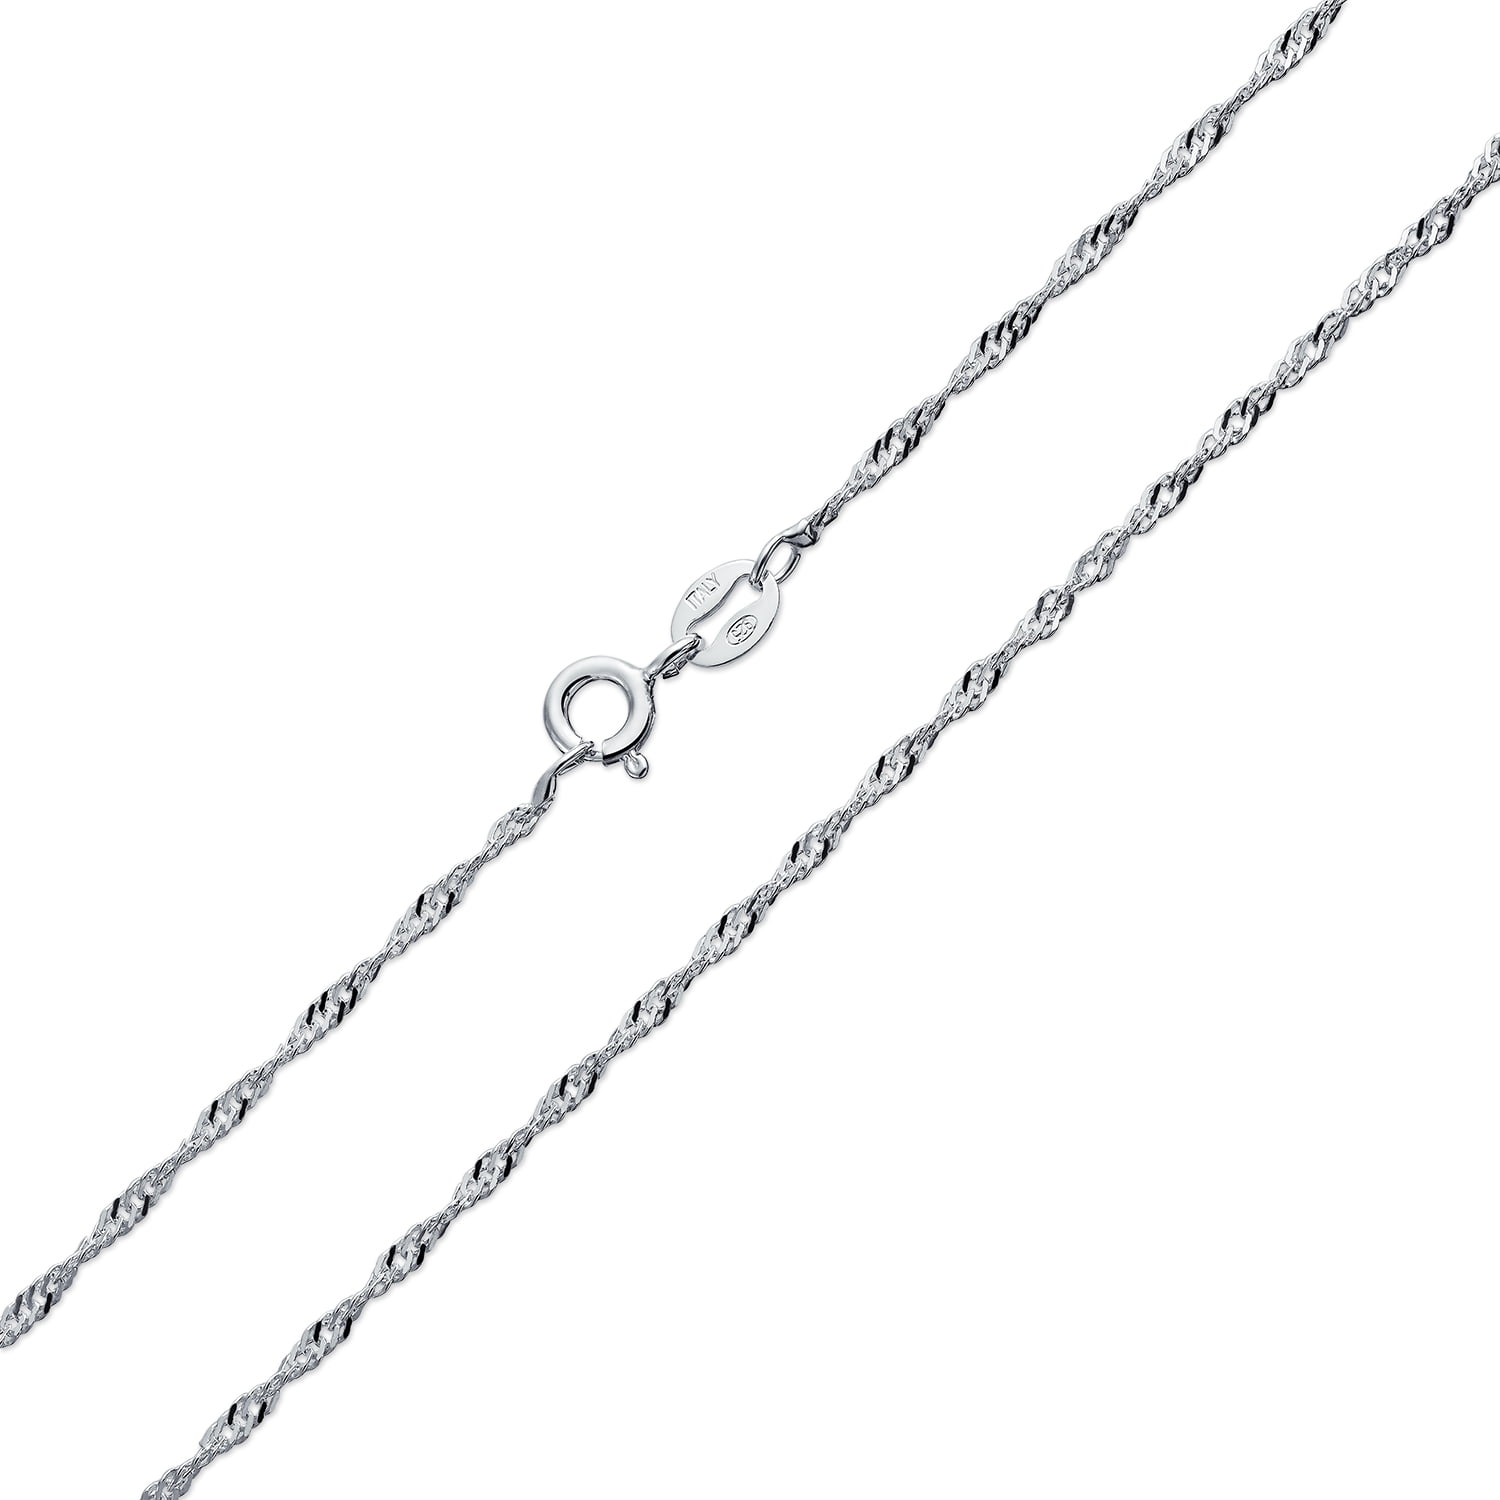 Wheat Chain .925 Sterling Silver Made in Italy Lobster Claw Clasp 16"-24" in Len